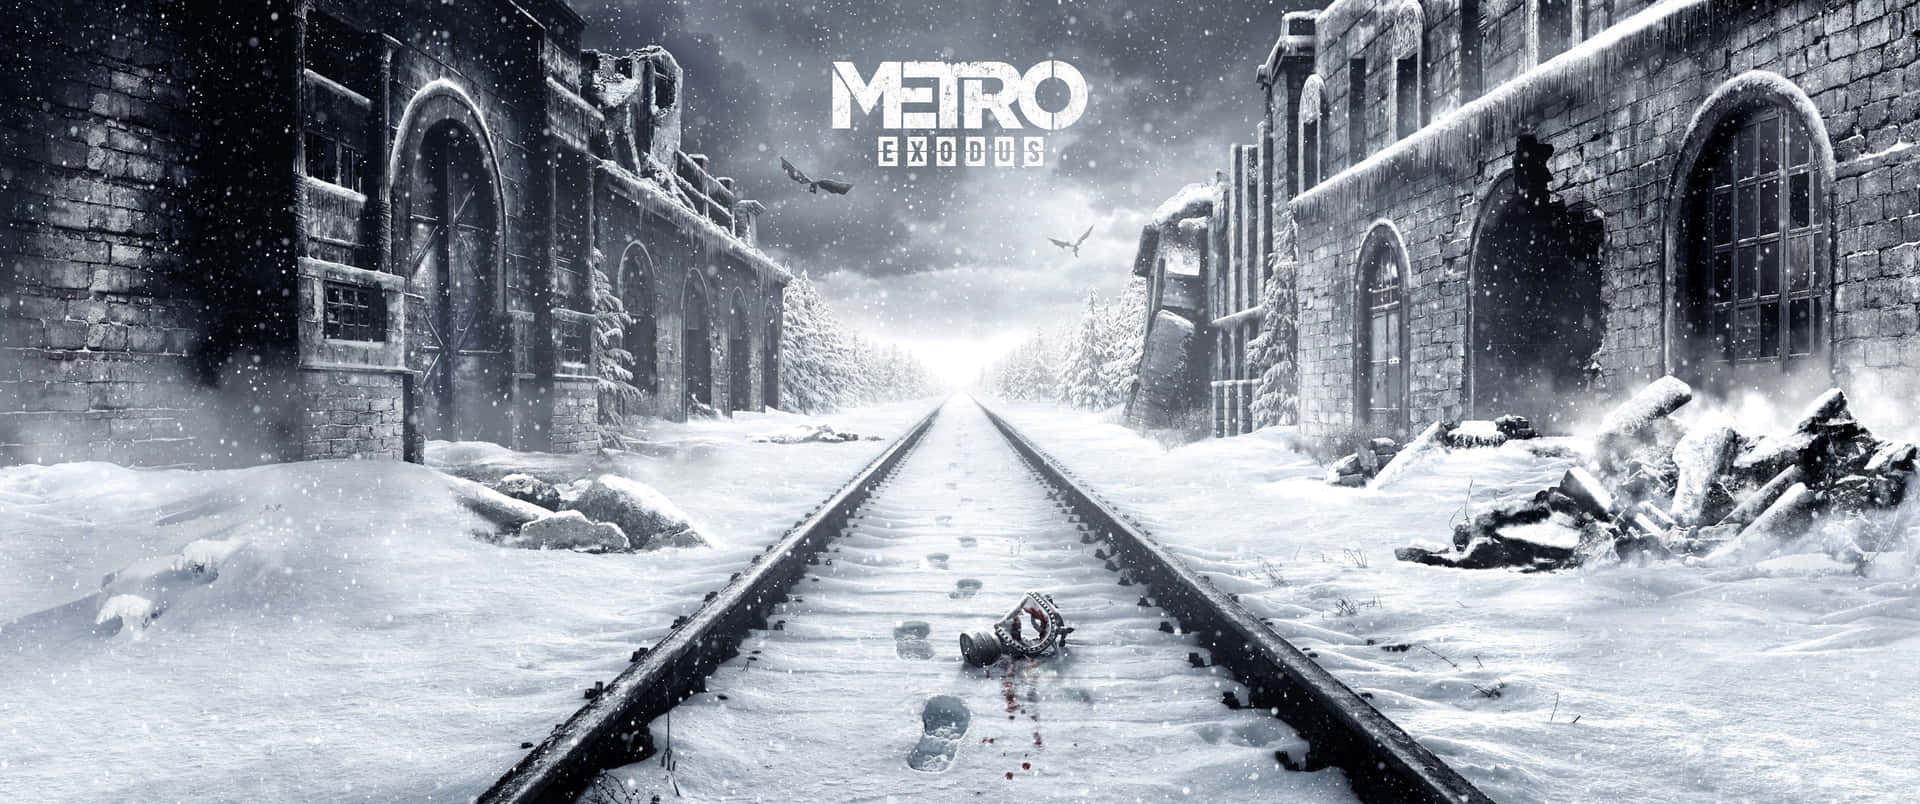 Intricate Details of the Post-Apocalyptic World in Metro Exodus 3440x1440p Background